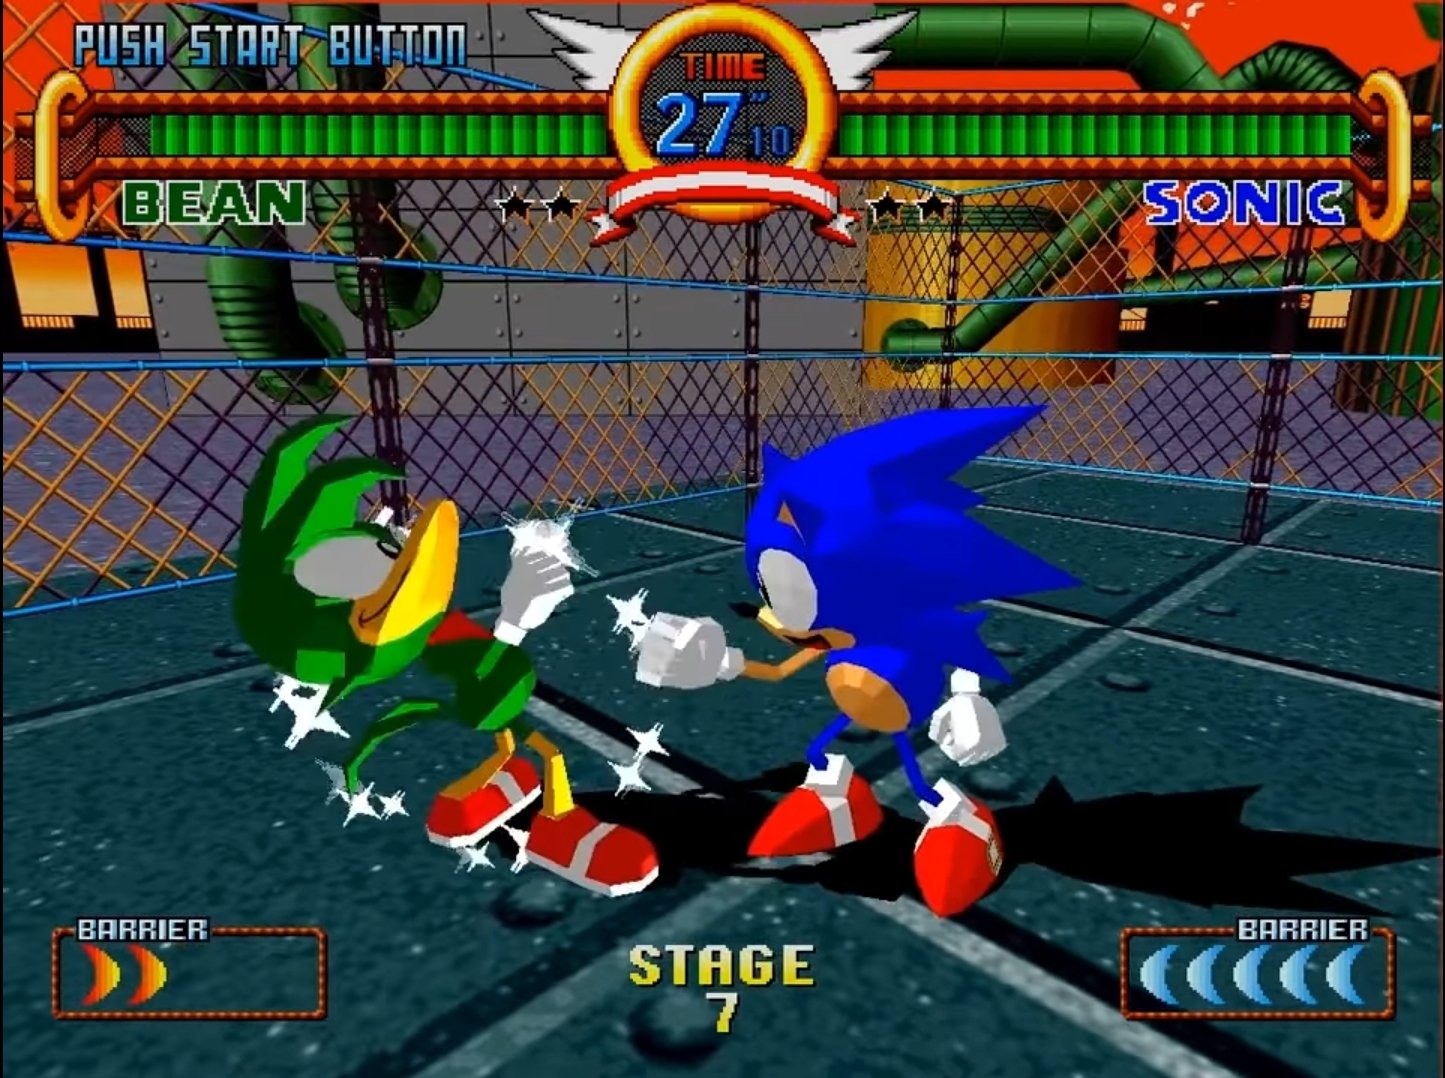 Semi Frequent Sonic Facts 🔫 on X: In Sonic the Fighters, Bean